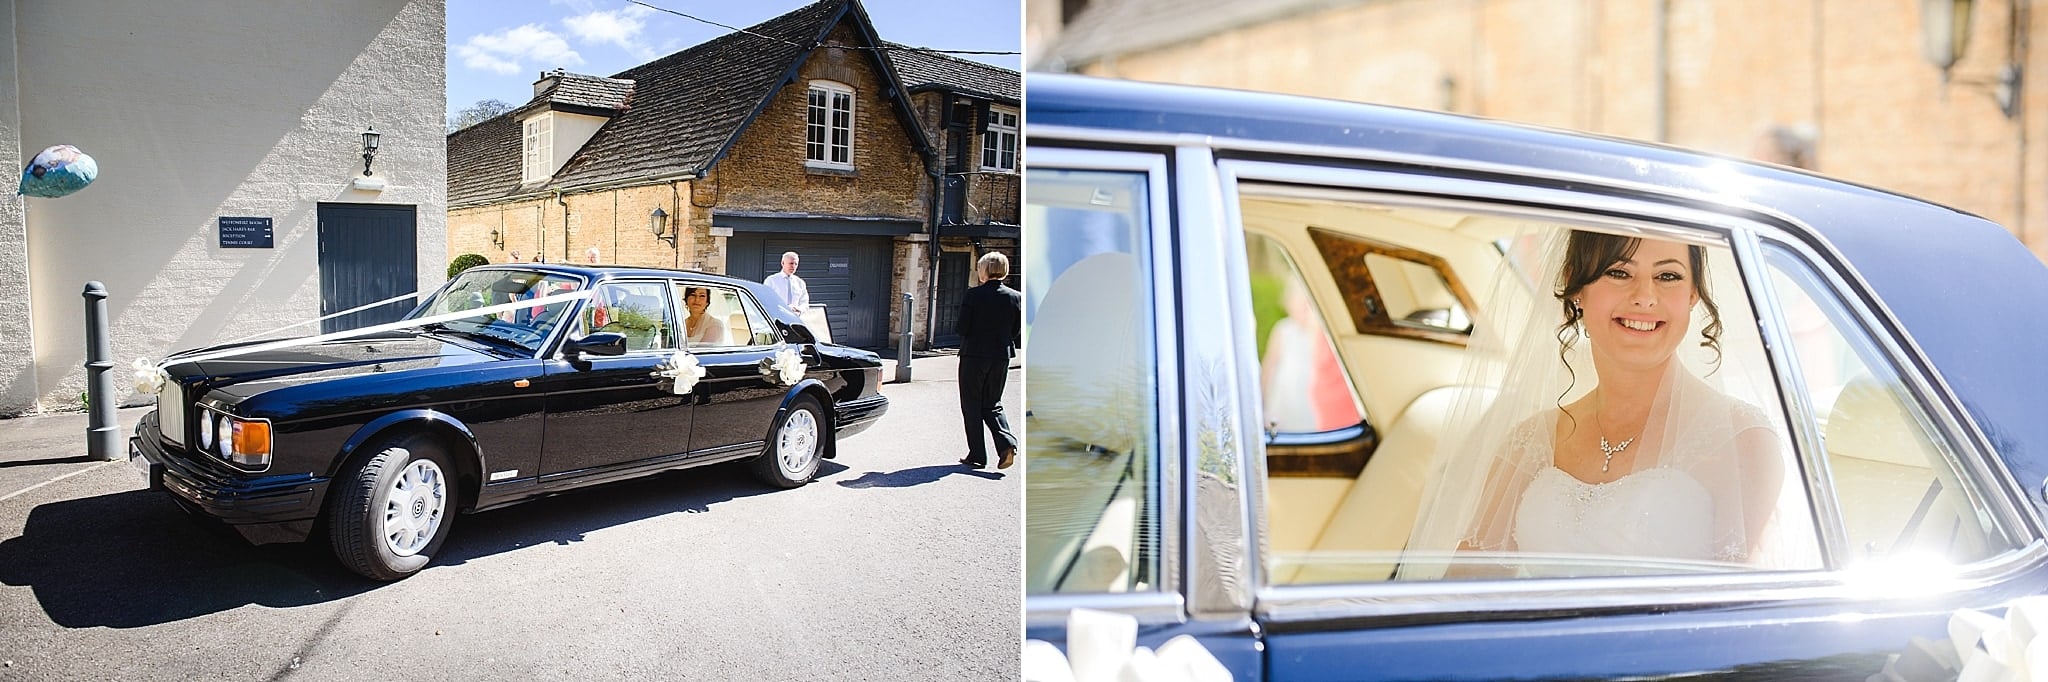 Bride arriving in her wedding car at the Hare and Hounds